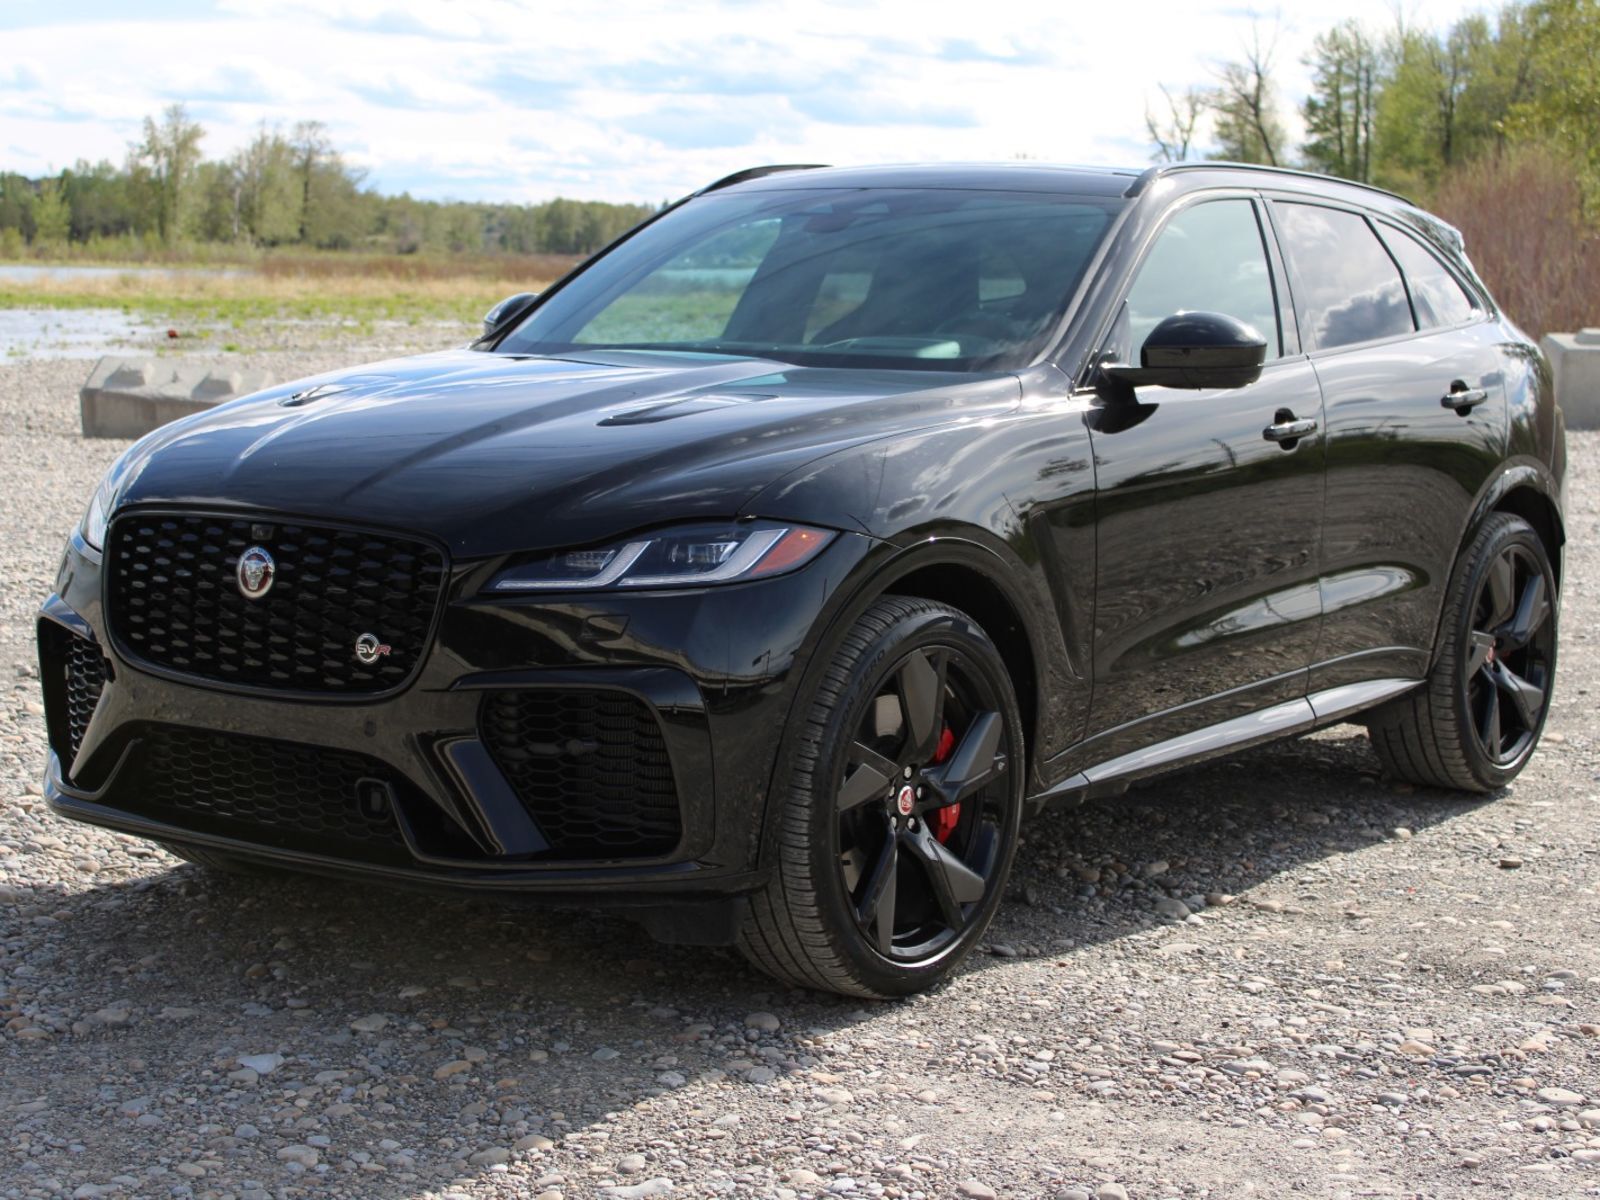 2022 Jaguar F-Pace 550 HORSEPOWER - CLEAN CARFAX - ONE OWNER -